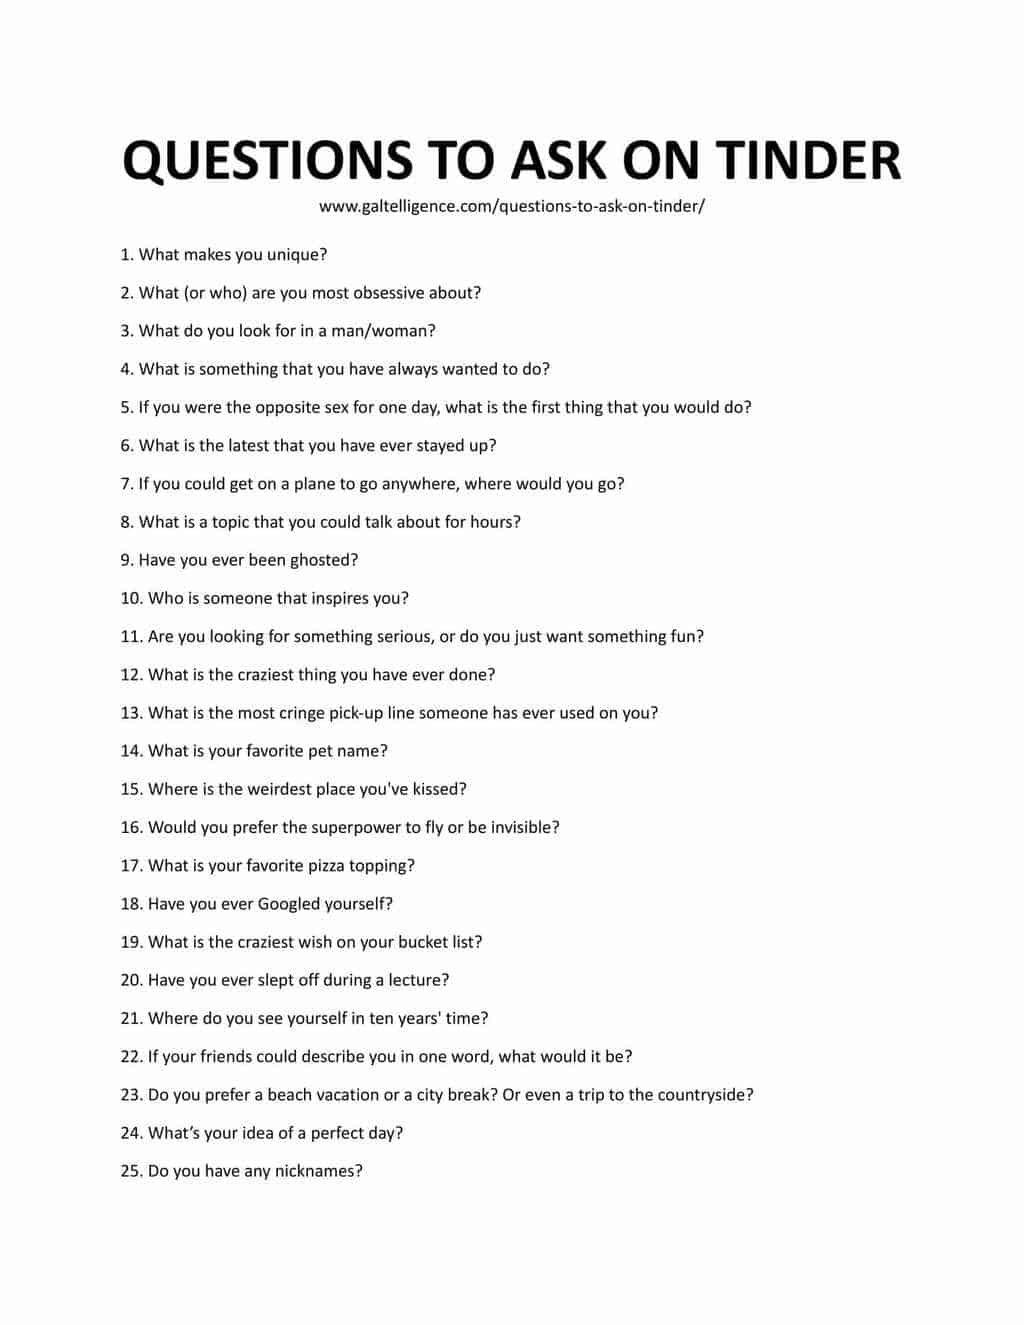 Downloadable and printable list of tinder questions